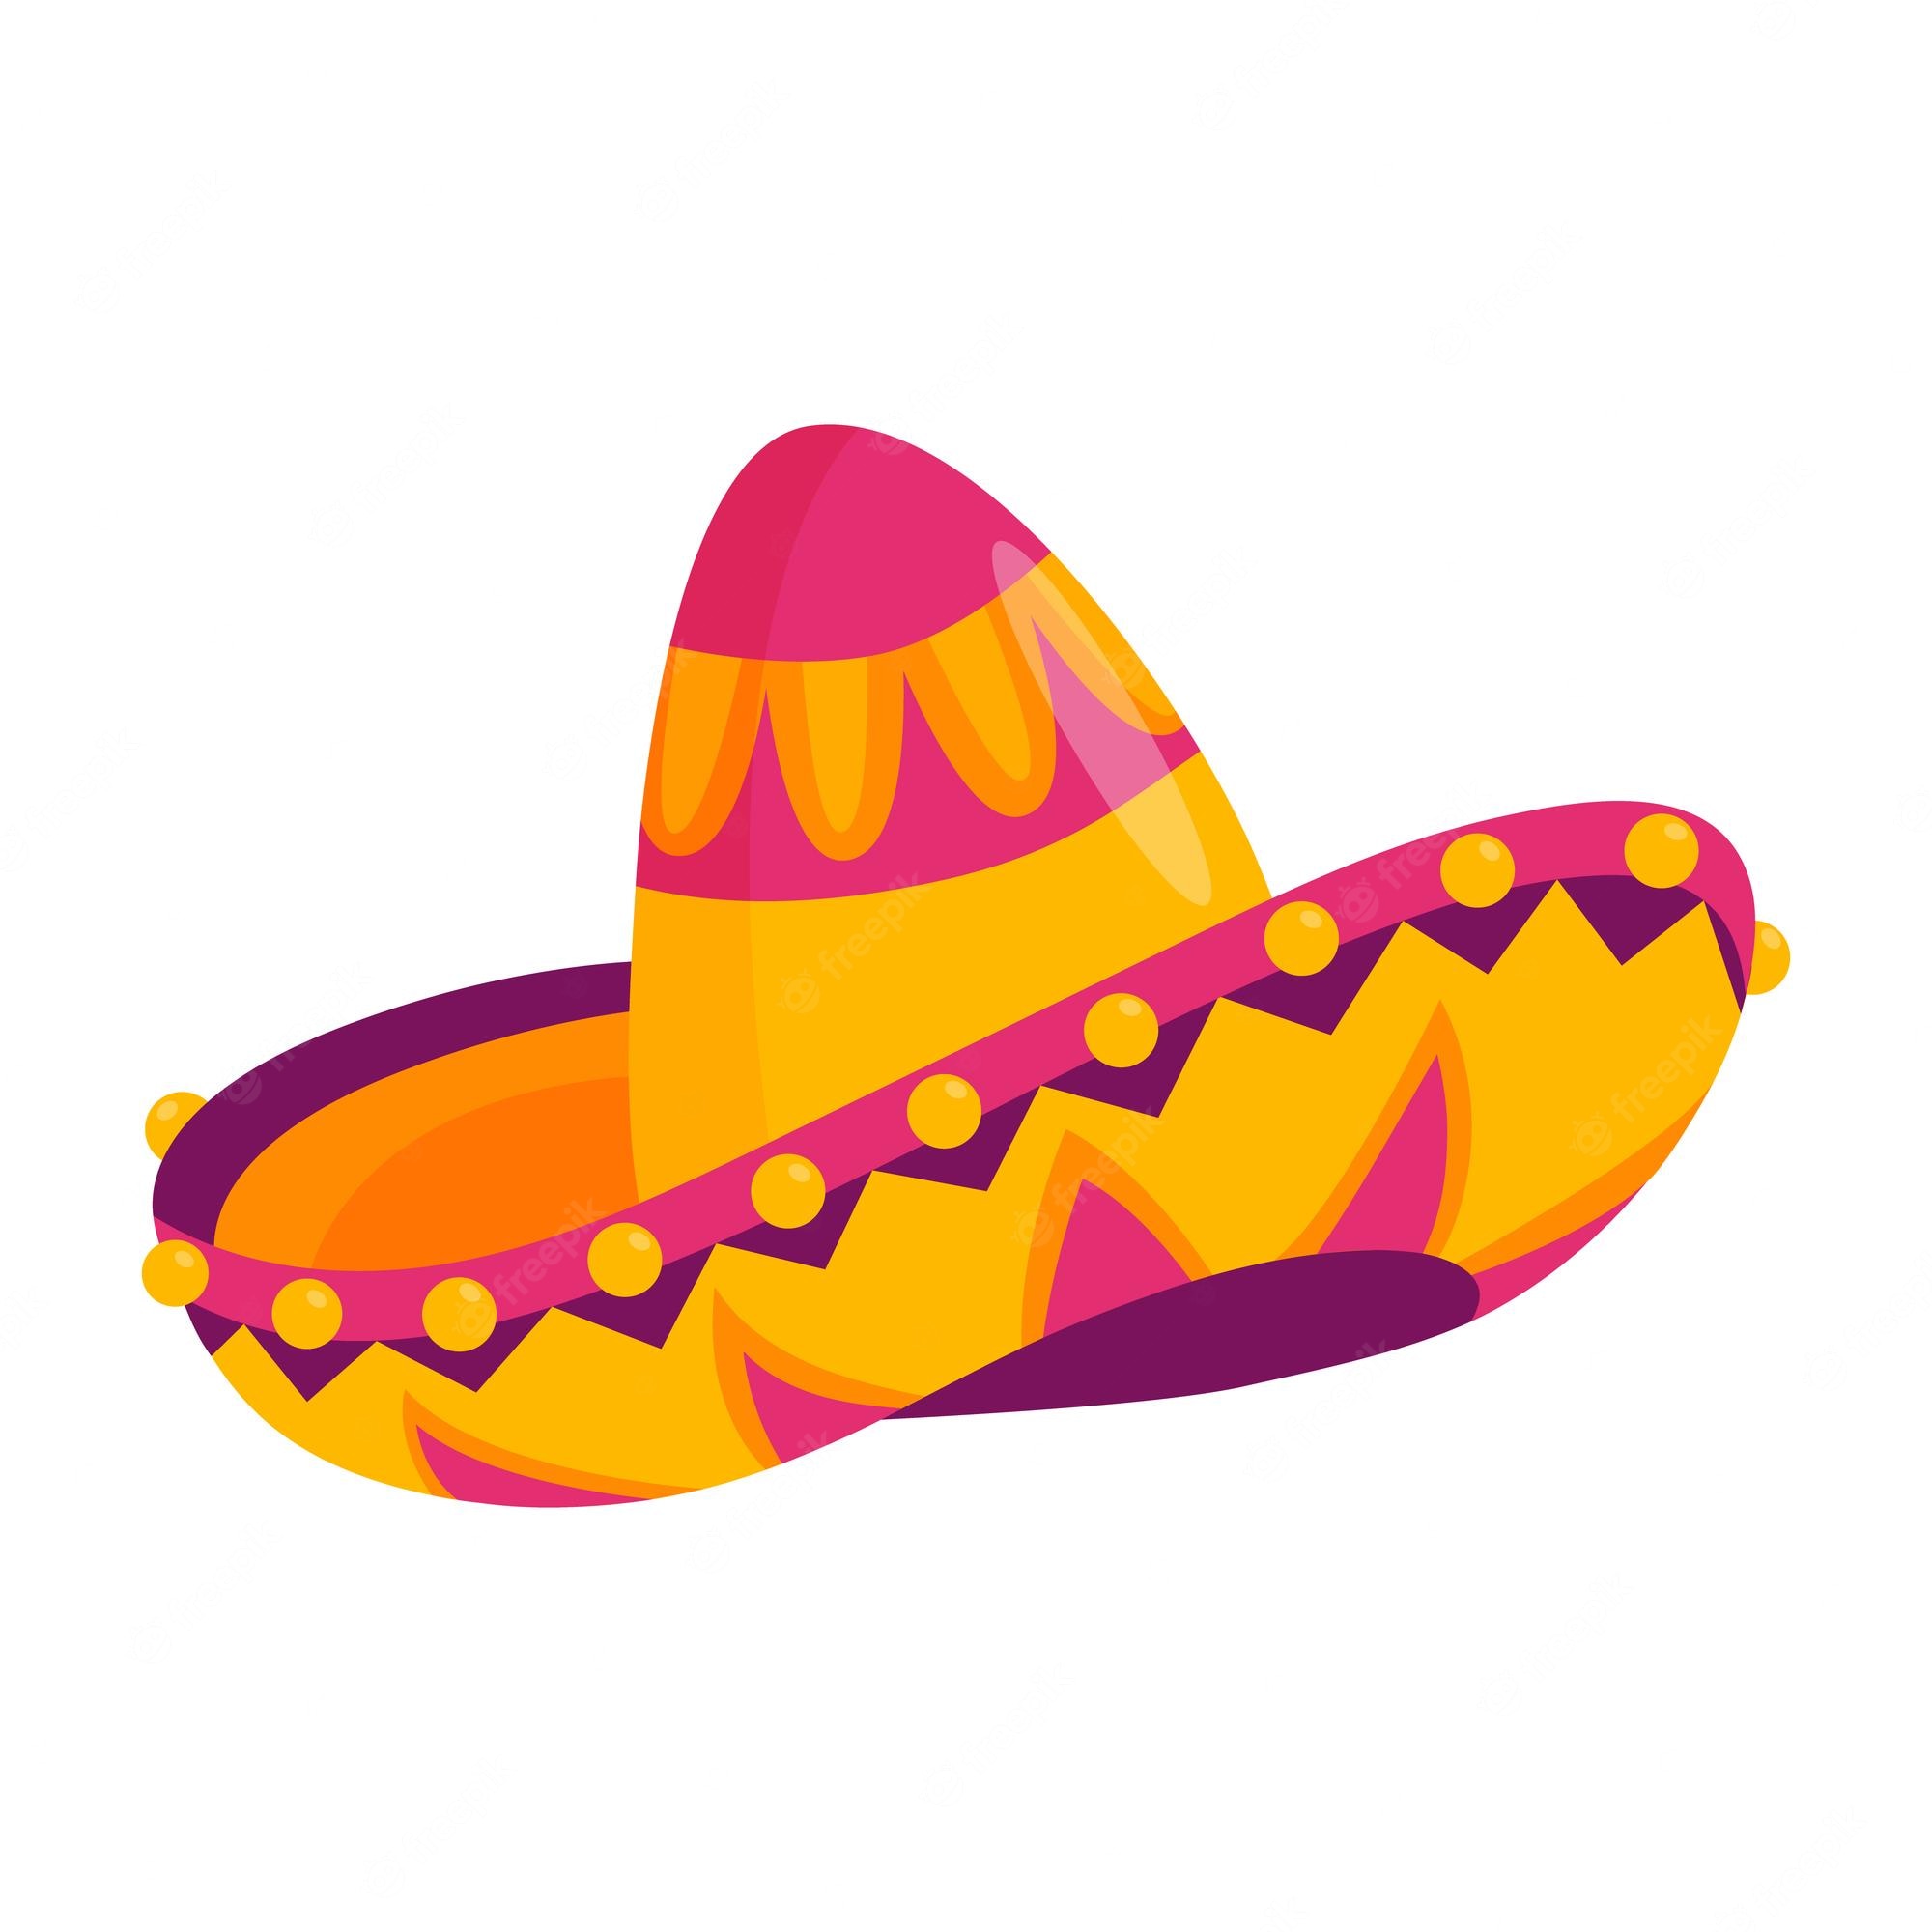 Mexican hat clipart design illustration 9391417 PNG - Clip Art Library